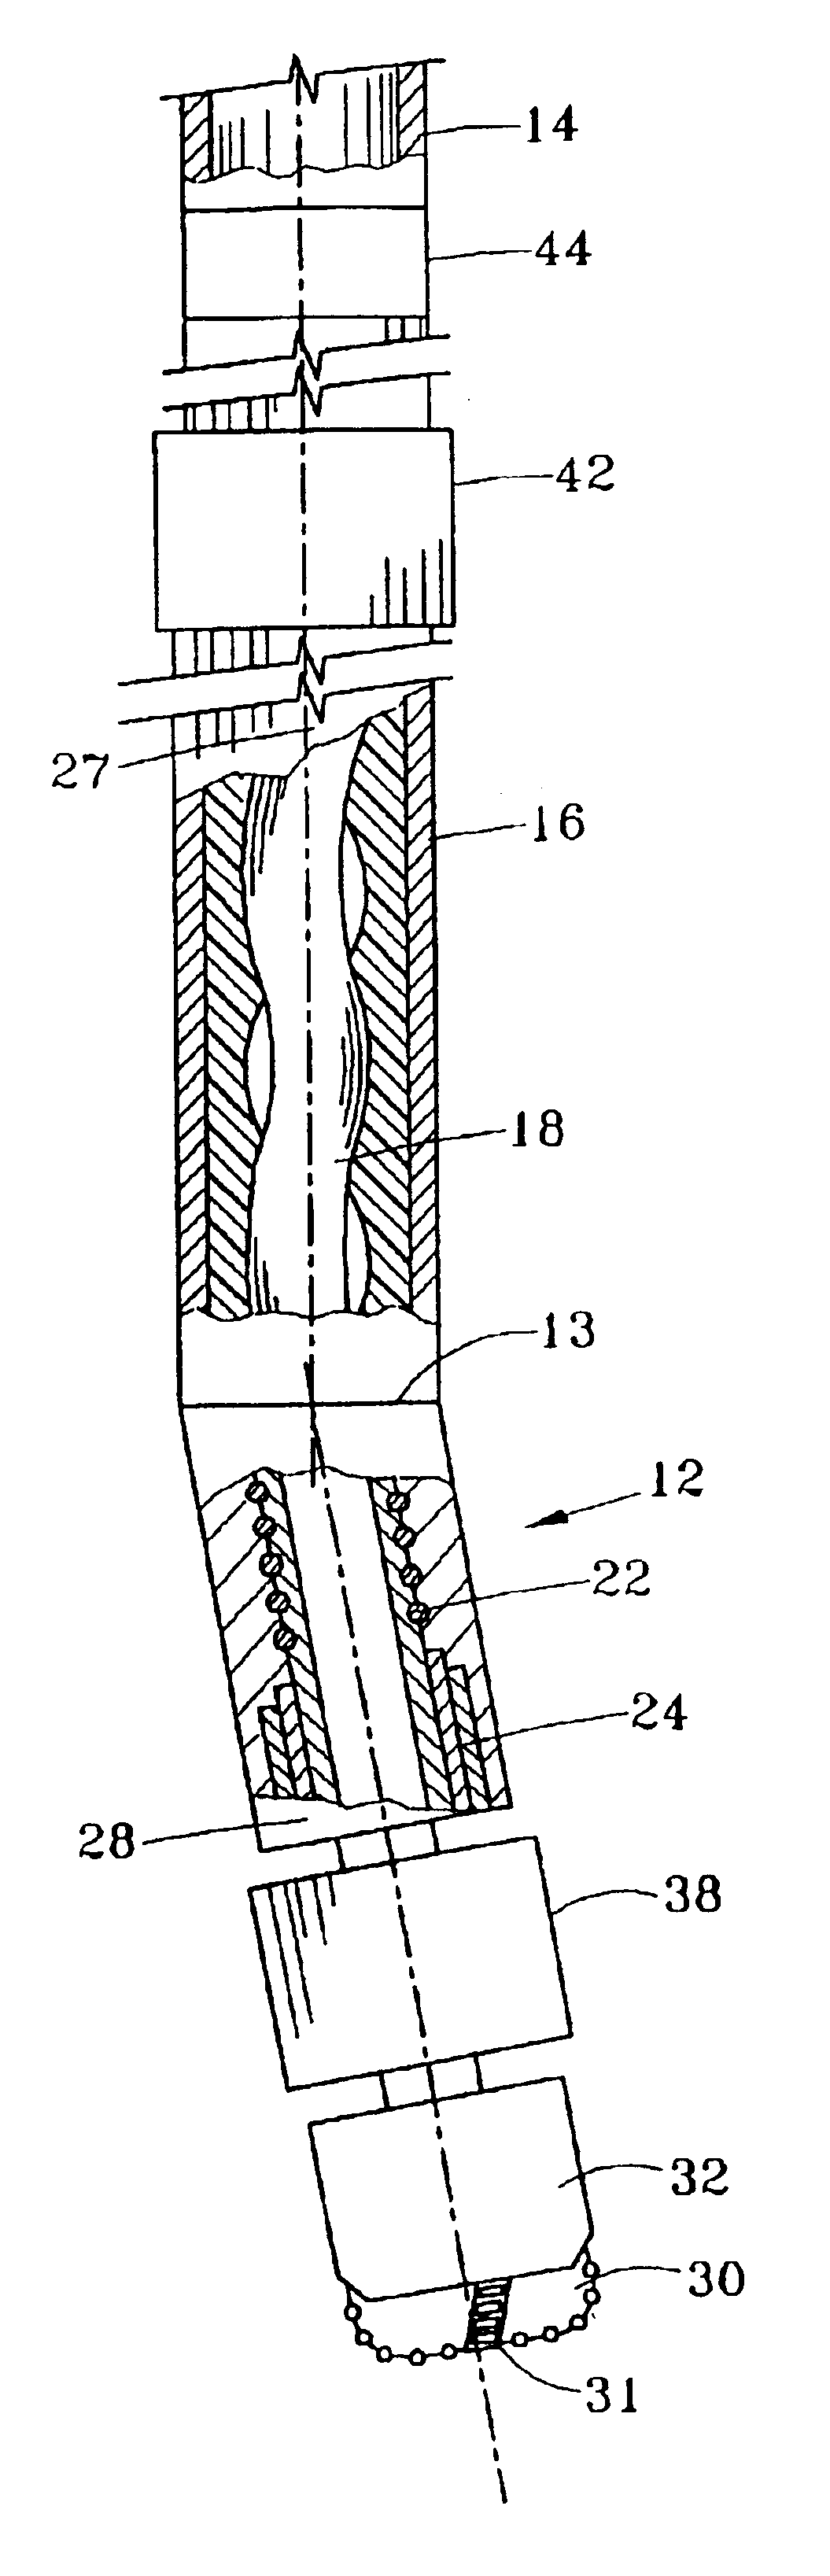 Steerable underreaming bottom hole assembly and method